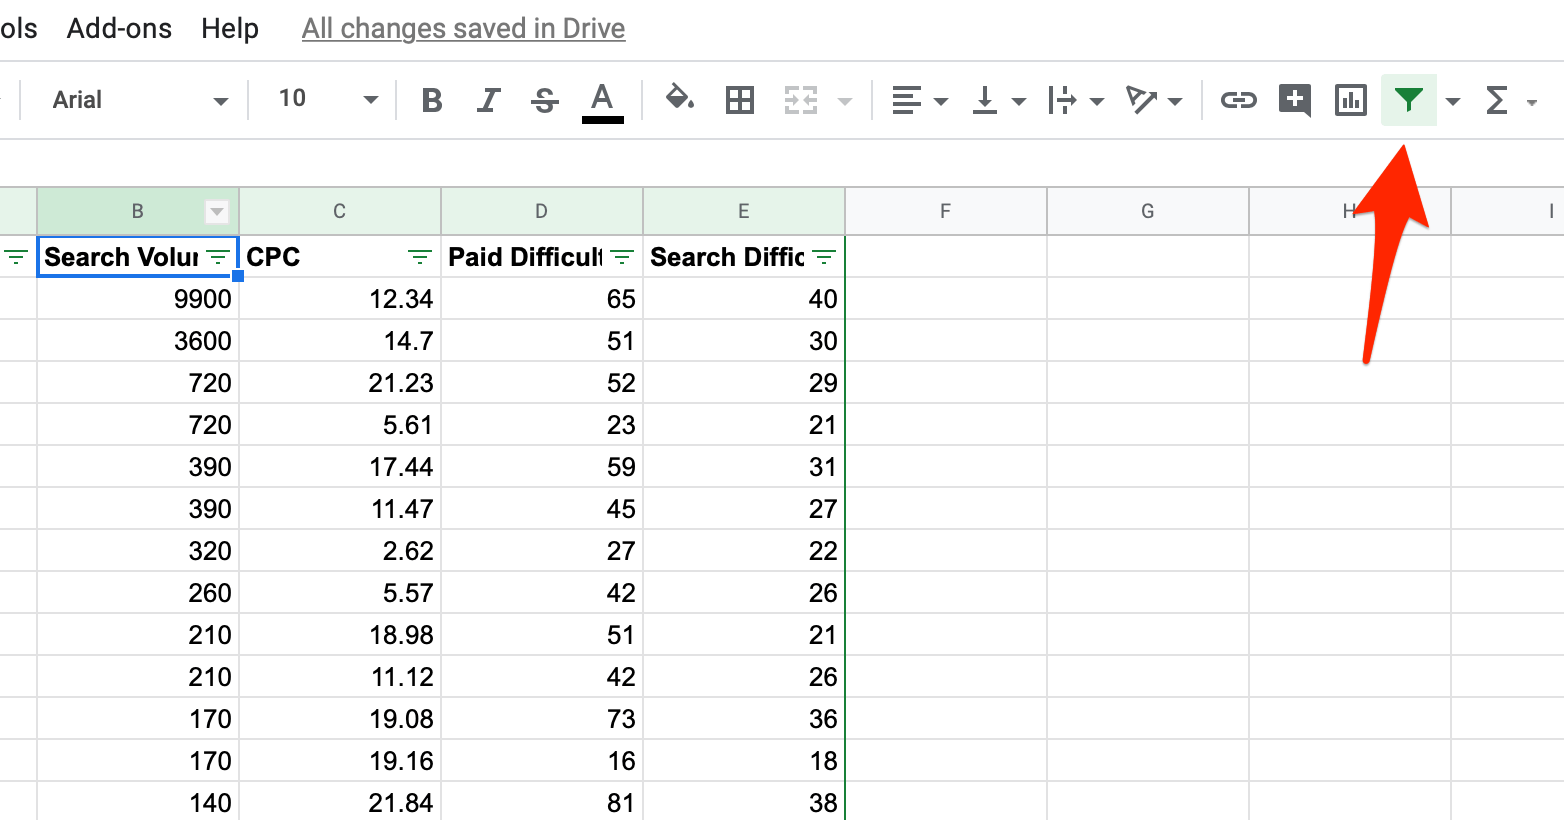 Creating filters for keyword data in Google Sheets